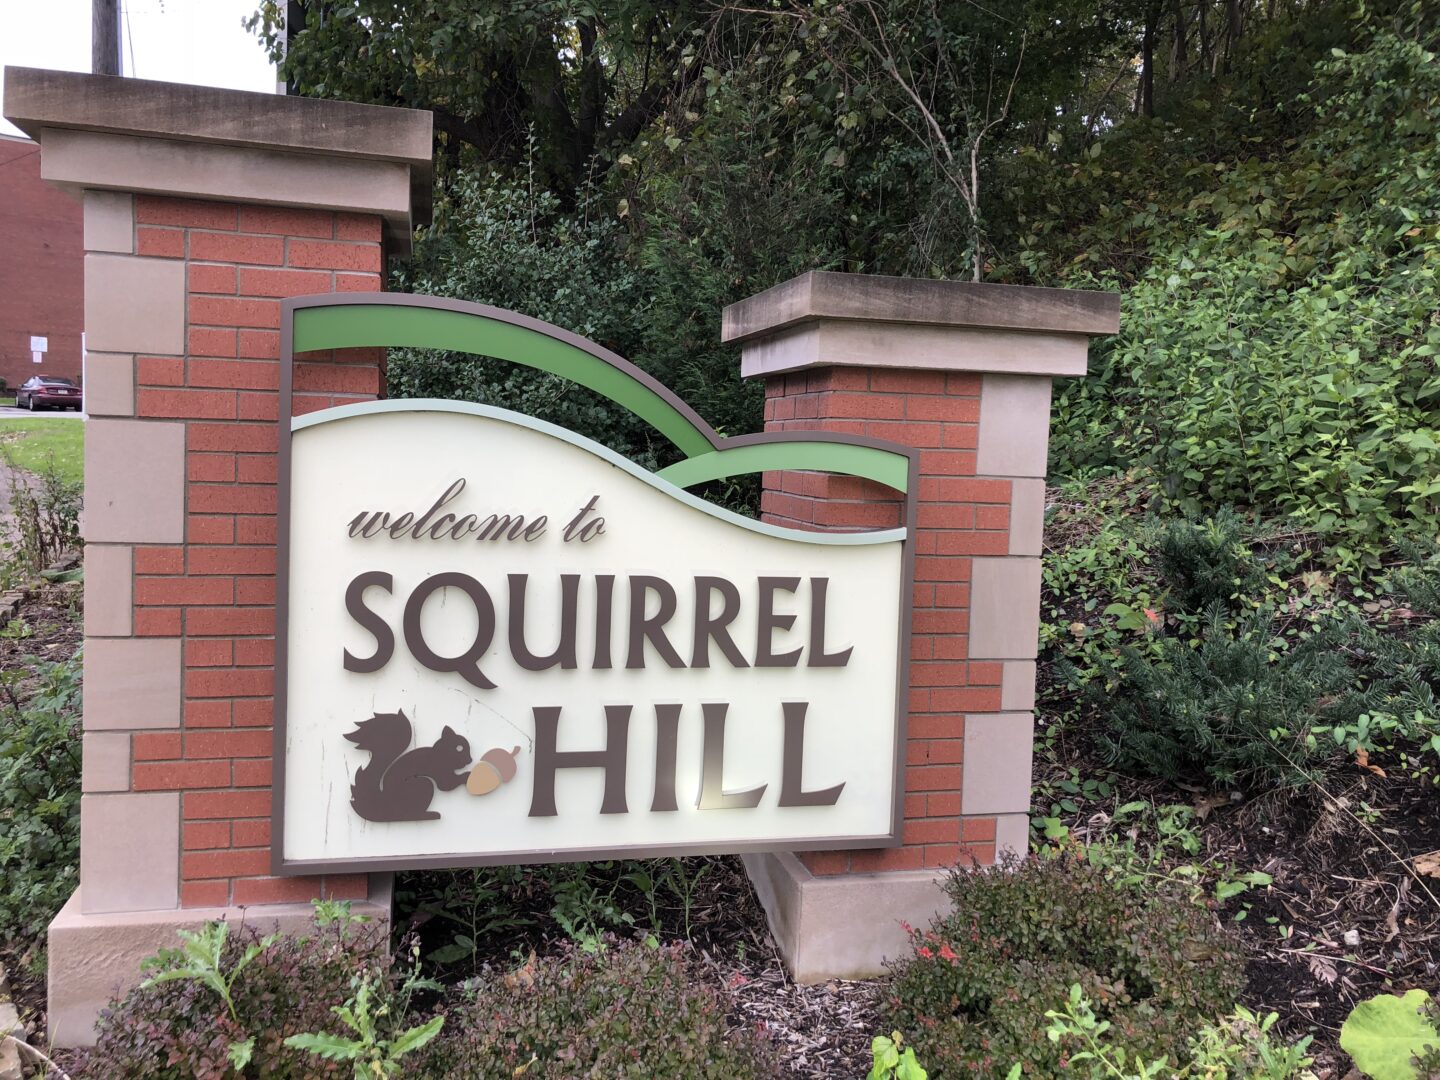 Squirrel Hill sign